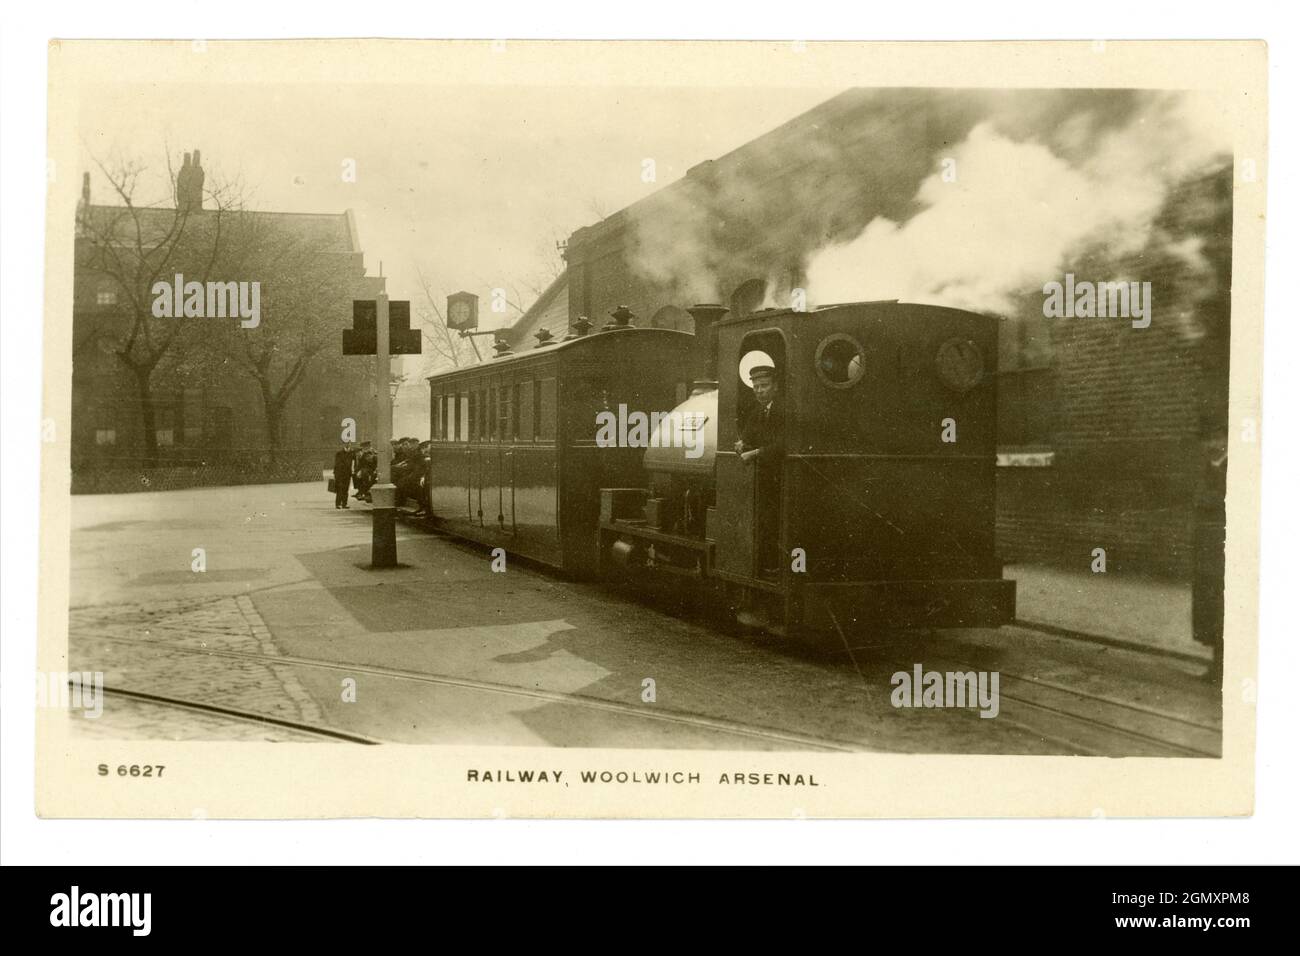 WW1 era postcard of railway engine (there were 3) with driver waiting at a platform - used for transporting munitions, serving Woolwich Arsenal. Called the Royal Arsenal Railway London.  Arsenal was a shell filling factory.  1914-1918 Stock Photo